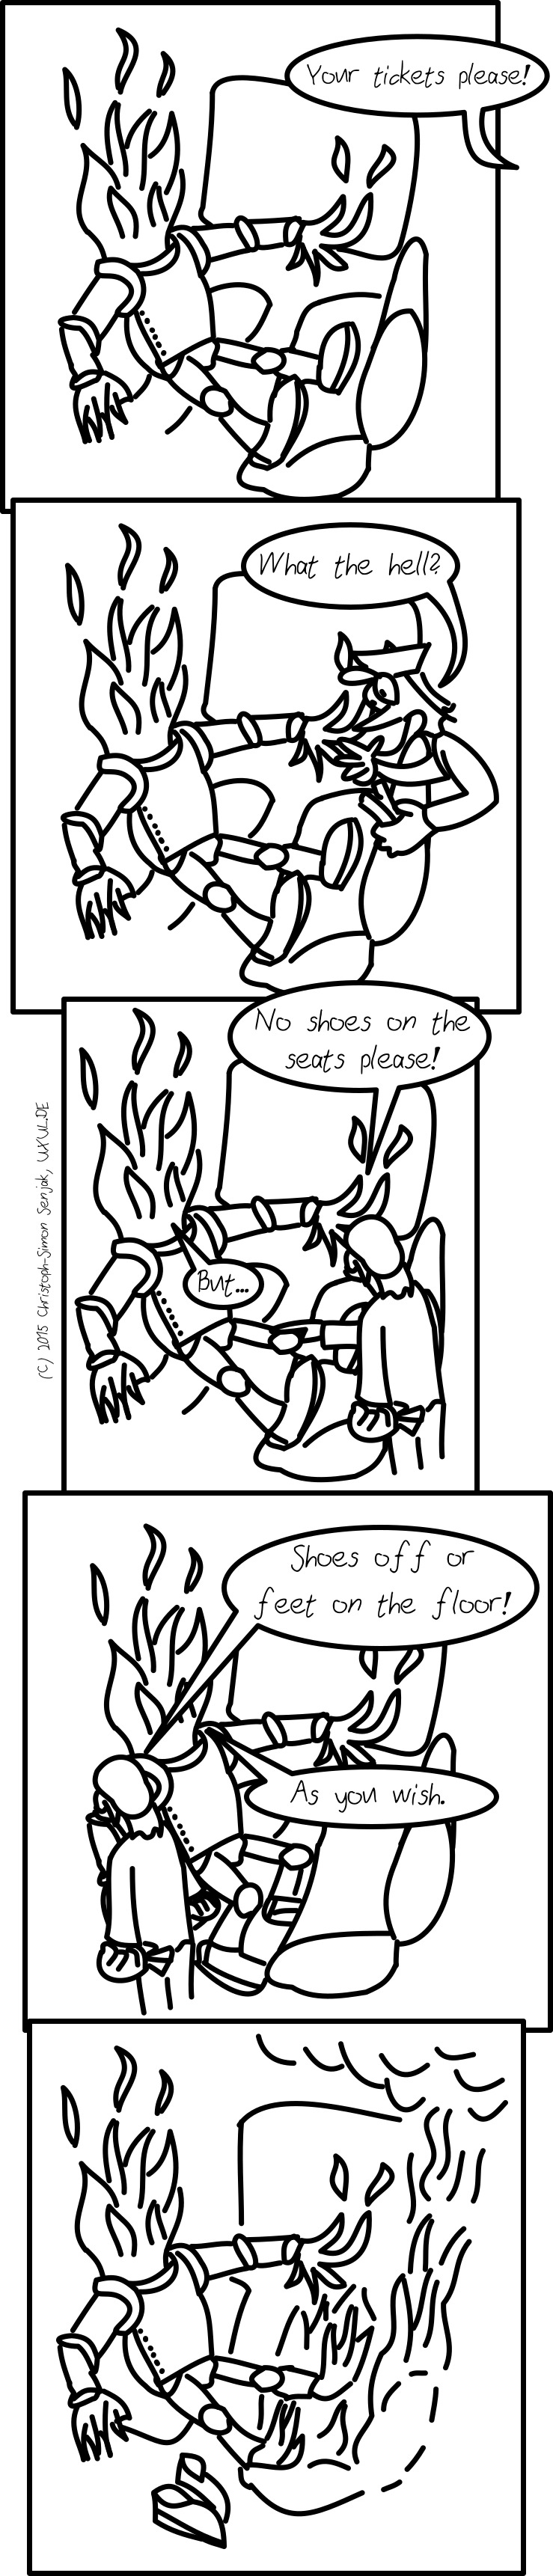 Panel 1: A fire creature in a knight's armor is sitting in a train, with his feet, also covered in armor, put on the opposite seat. From outside the scene somebody sais "your tickets please!" -- Panel 2: A ticket inspector appears and sais "what the hell" -- Panel 3: The inspector points on the fire creature's legs and sais "No shoes on the seats please" the fire creature answers "But…" -- Panel 4: The inspector sais "Shoes off or feet on the floor!". The fire creature puts its feet on the floor and sais "As you wish." -- Panel 5: The fire creature took its shoes off, its feet consist of fire. The fire inflames the opposite seat, which burns and smokes.